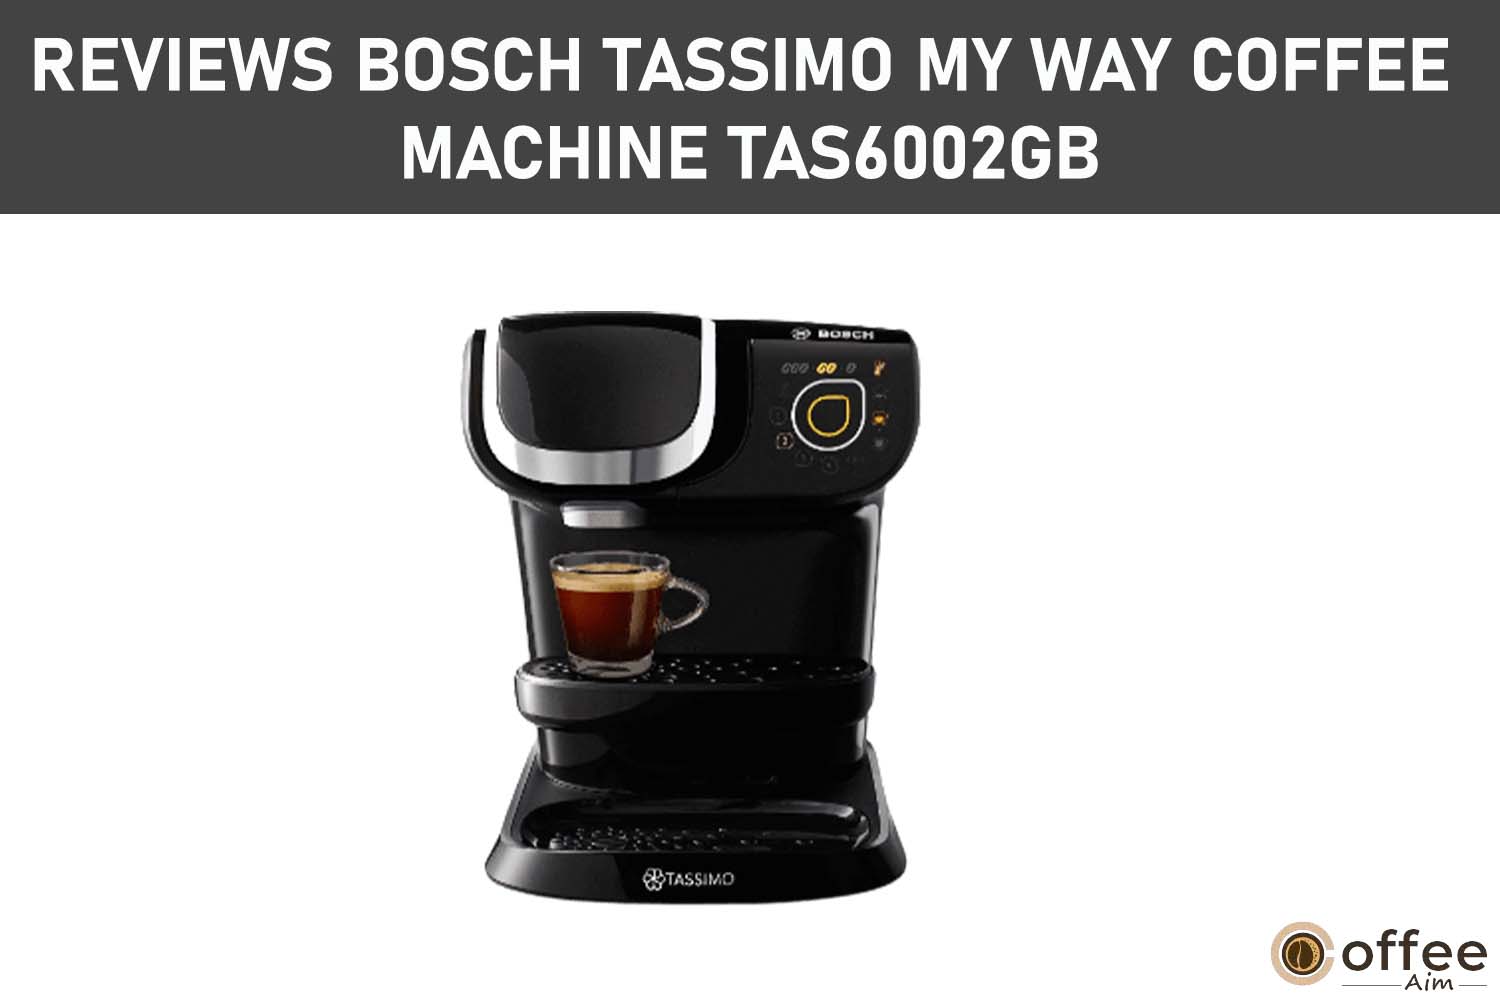 Featured image for the article "Reviews Bosch Tassimo My Way Coffee Machine TAS6002GB"